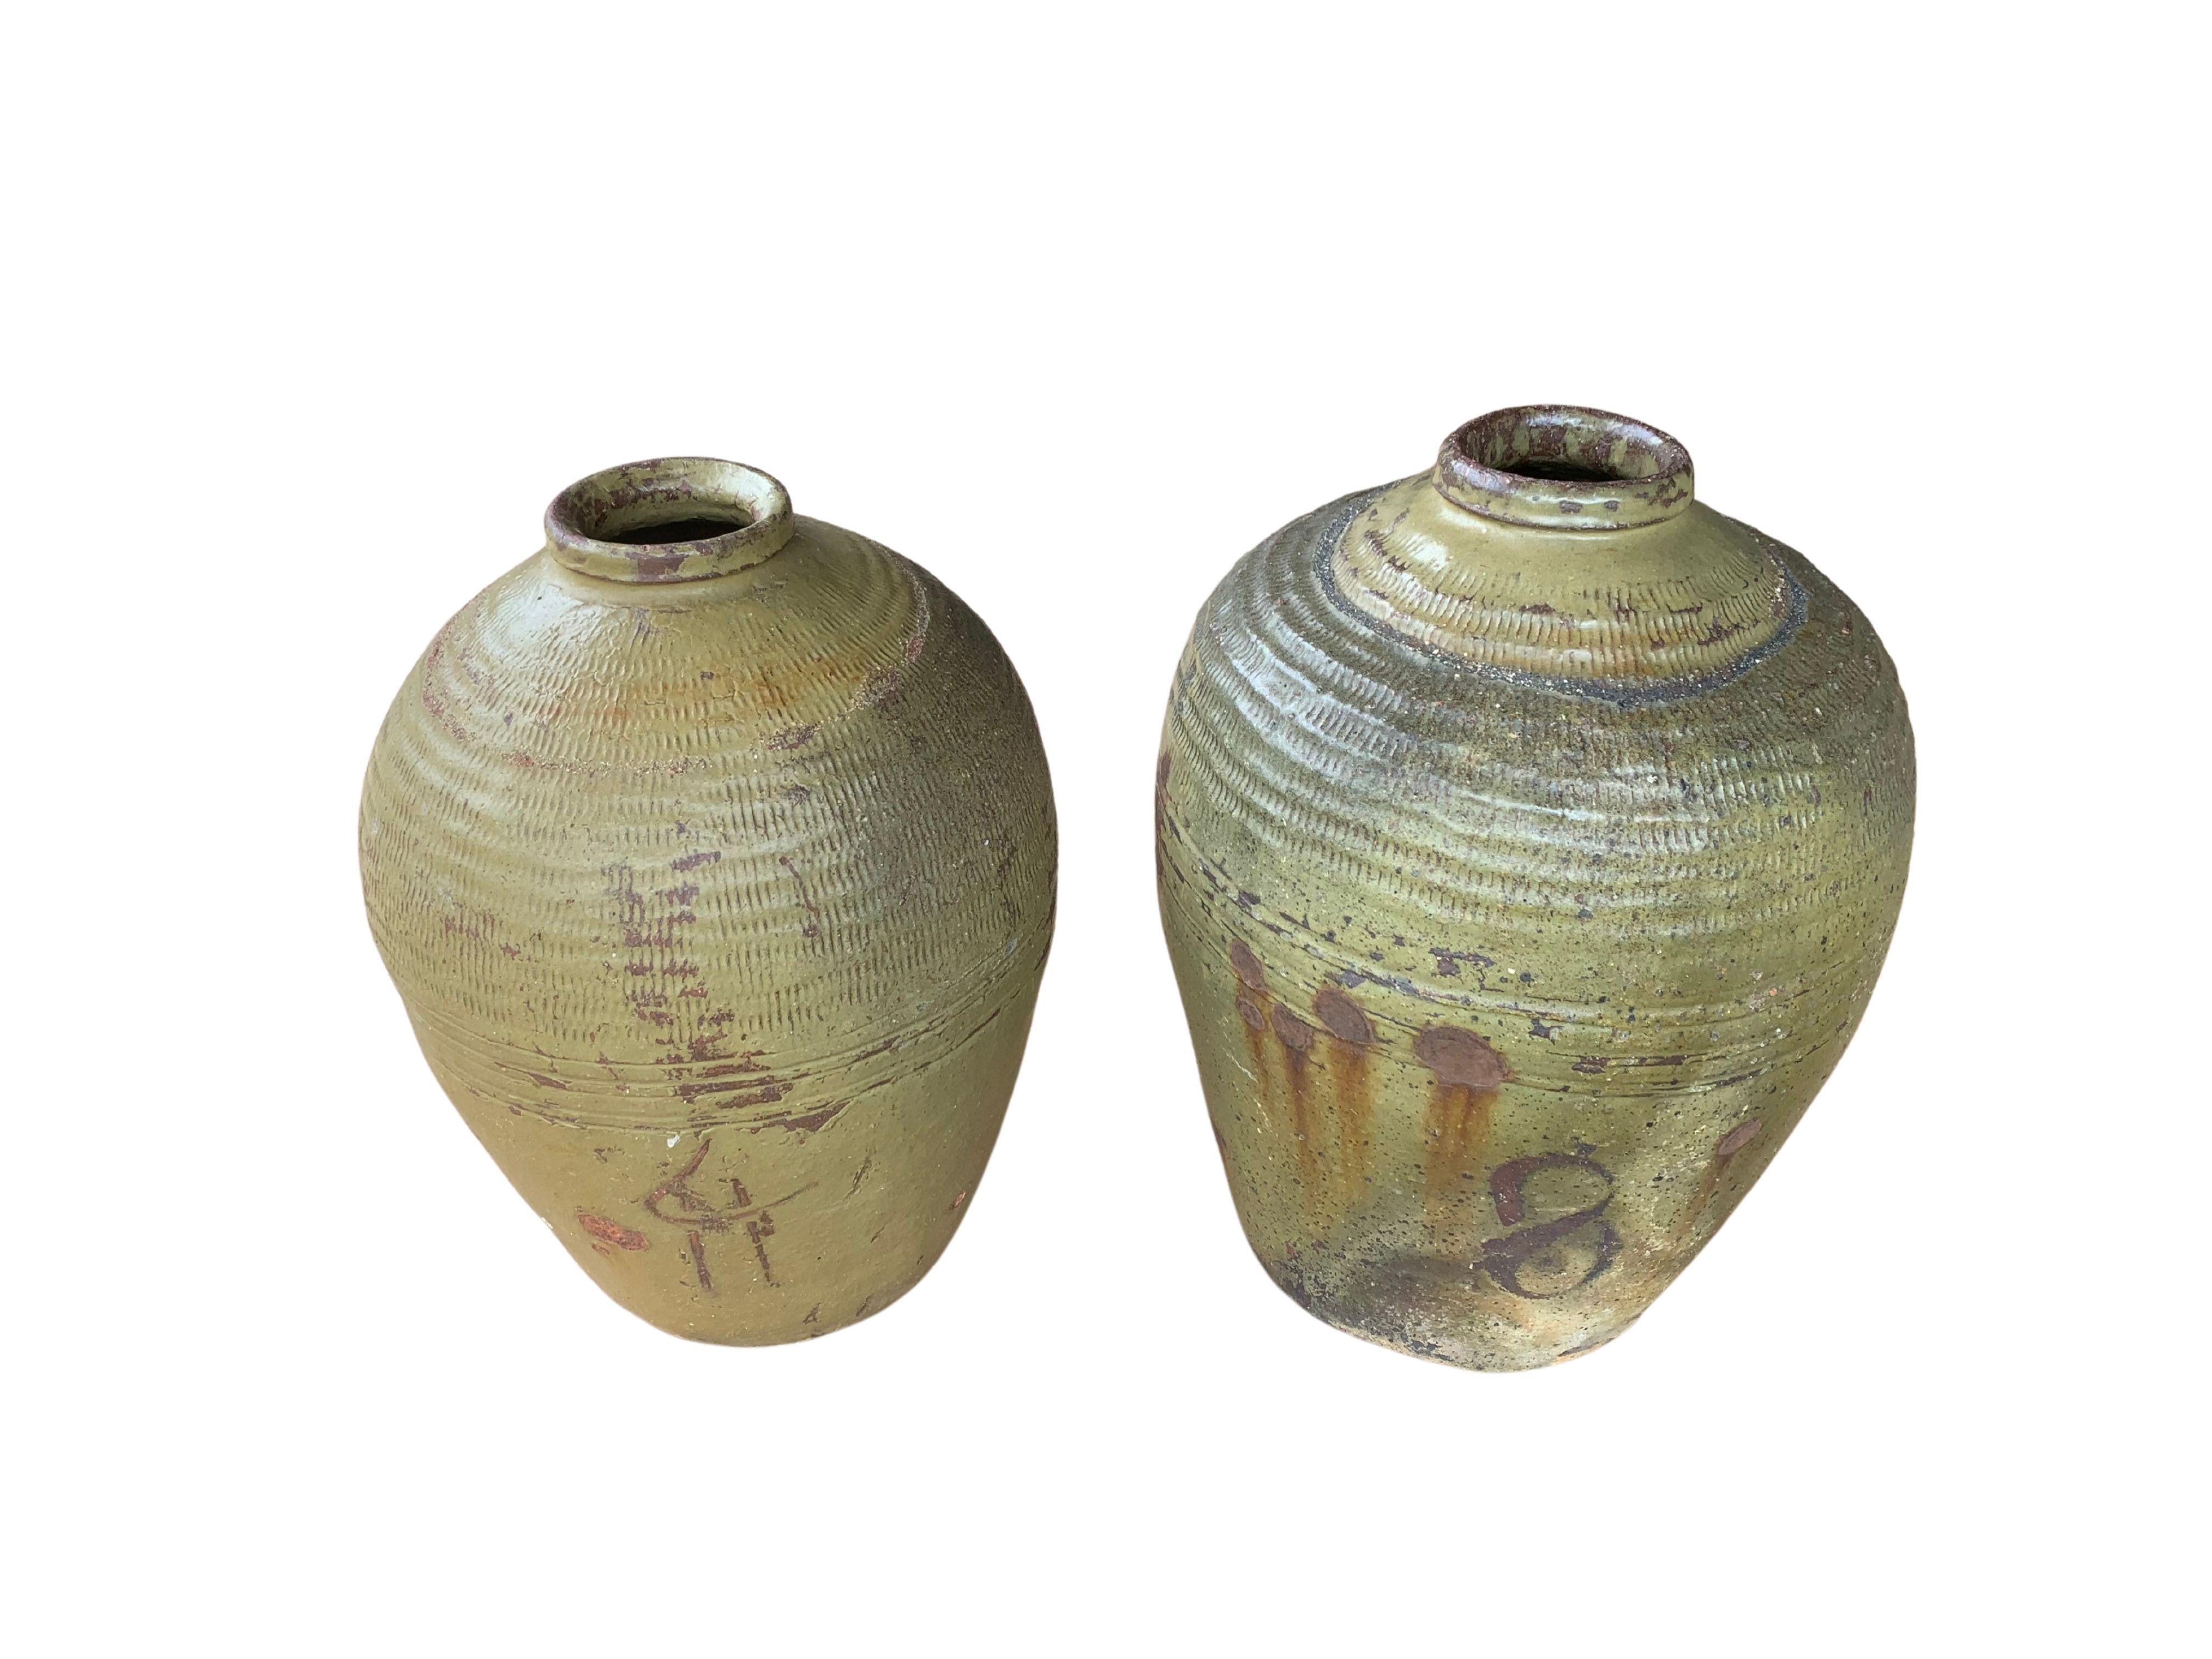 These glazed Chinese ceramic jars from the turn of the 19th century were once used for pickling foods. They feature a jade green finish and outer surface that features a ribbed texture. A great example of Chinese pottery, their imperfections and